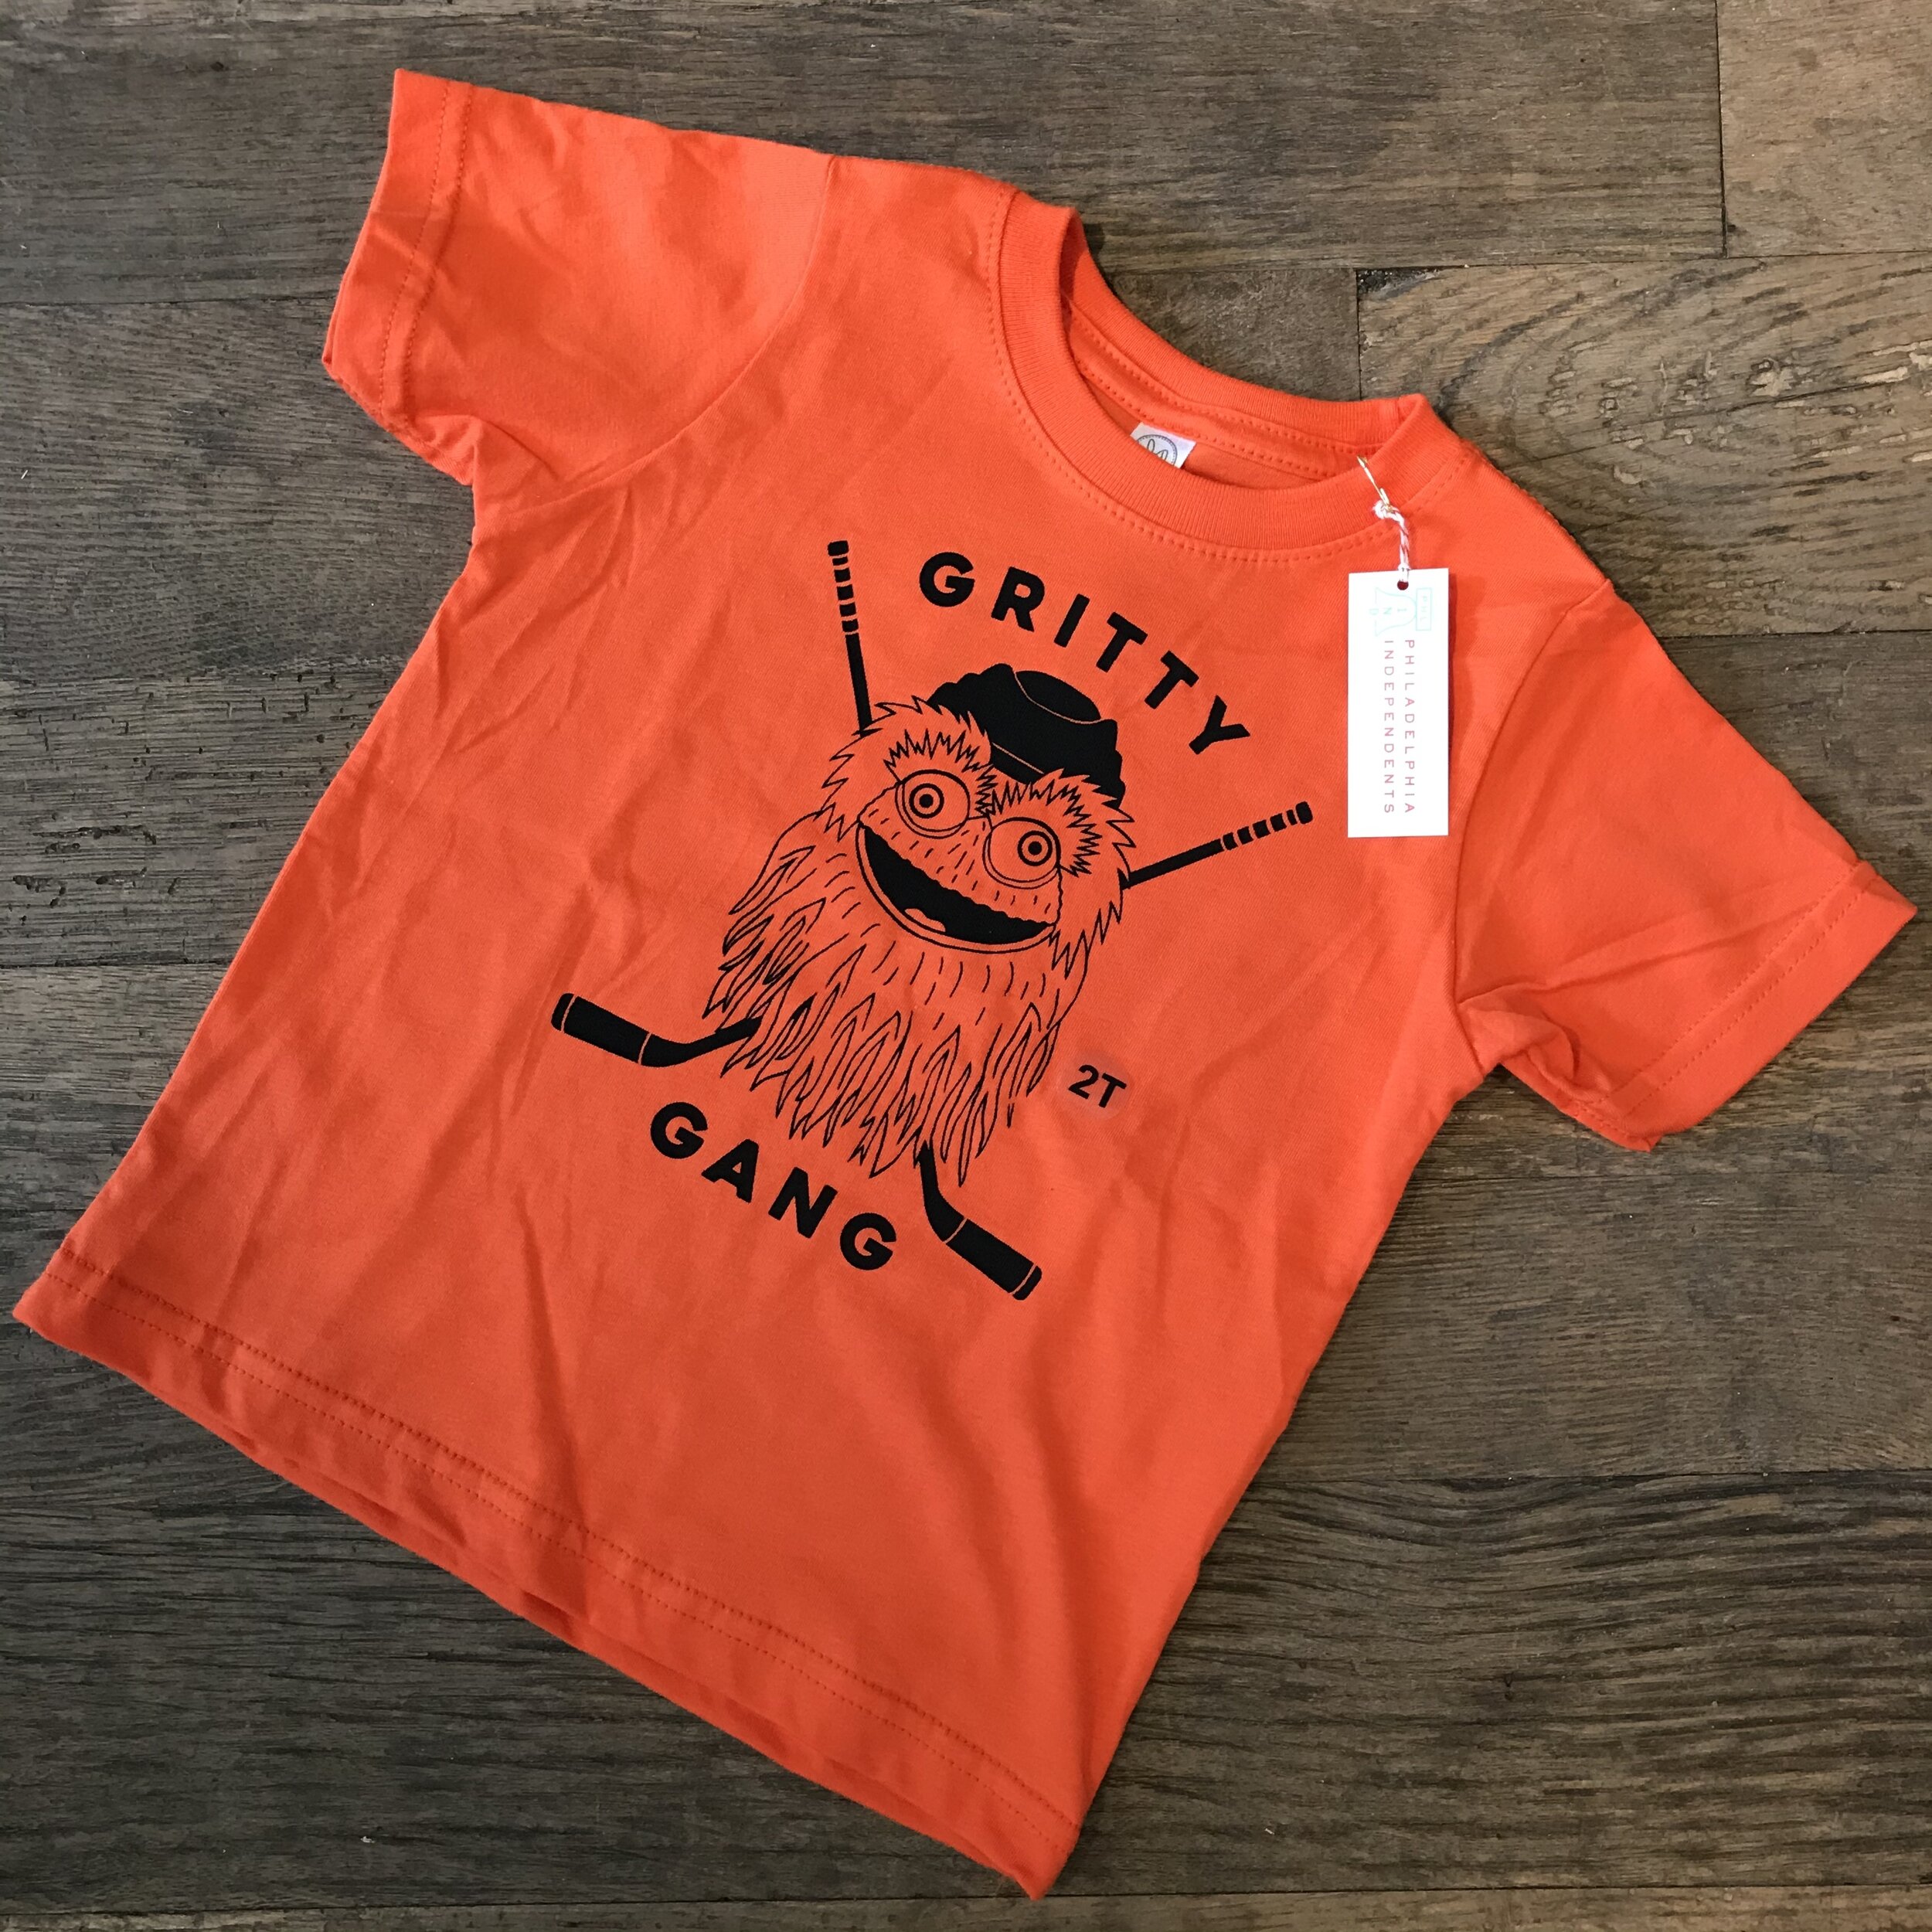 Gritty Gang Toddler T-Shirt — Philadelphia Independents